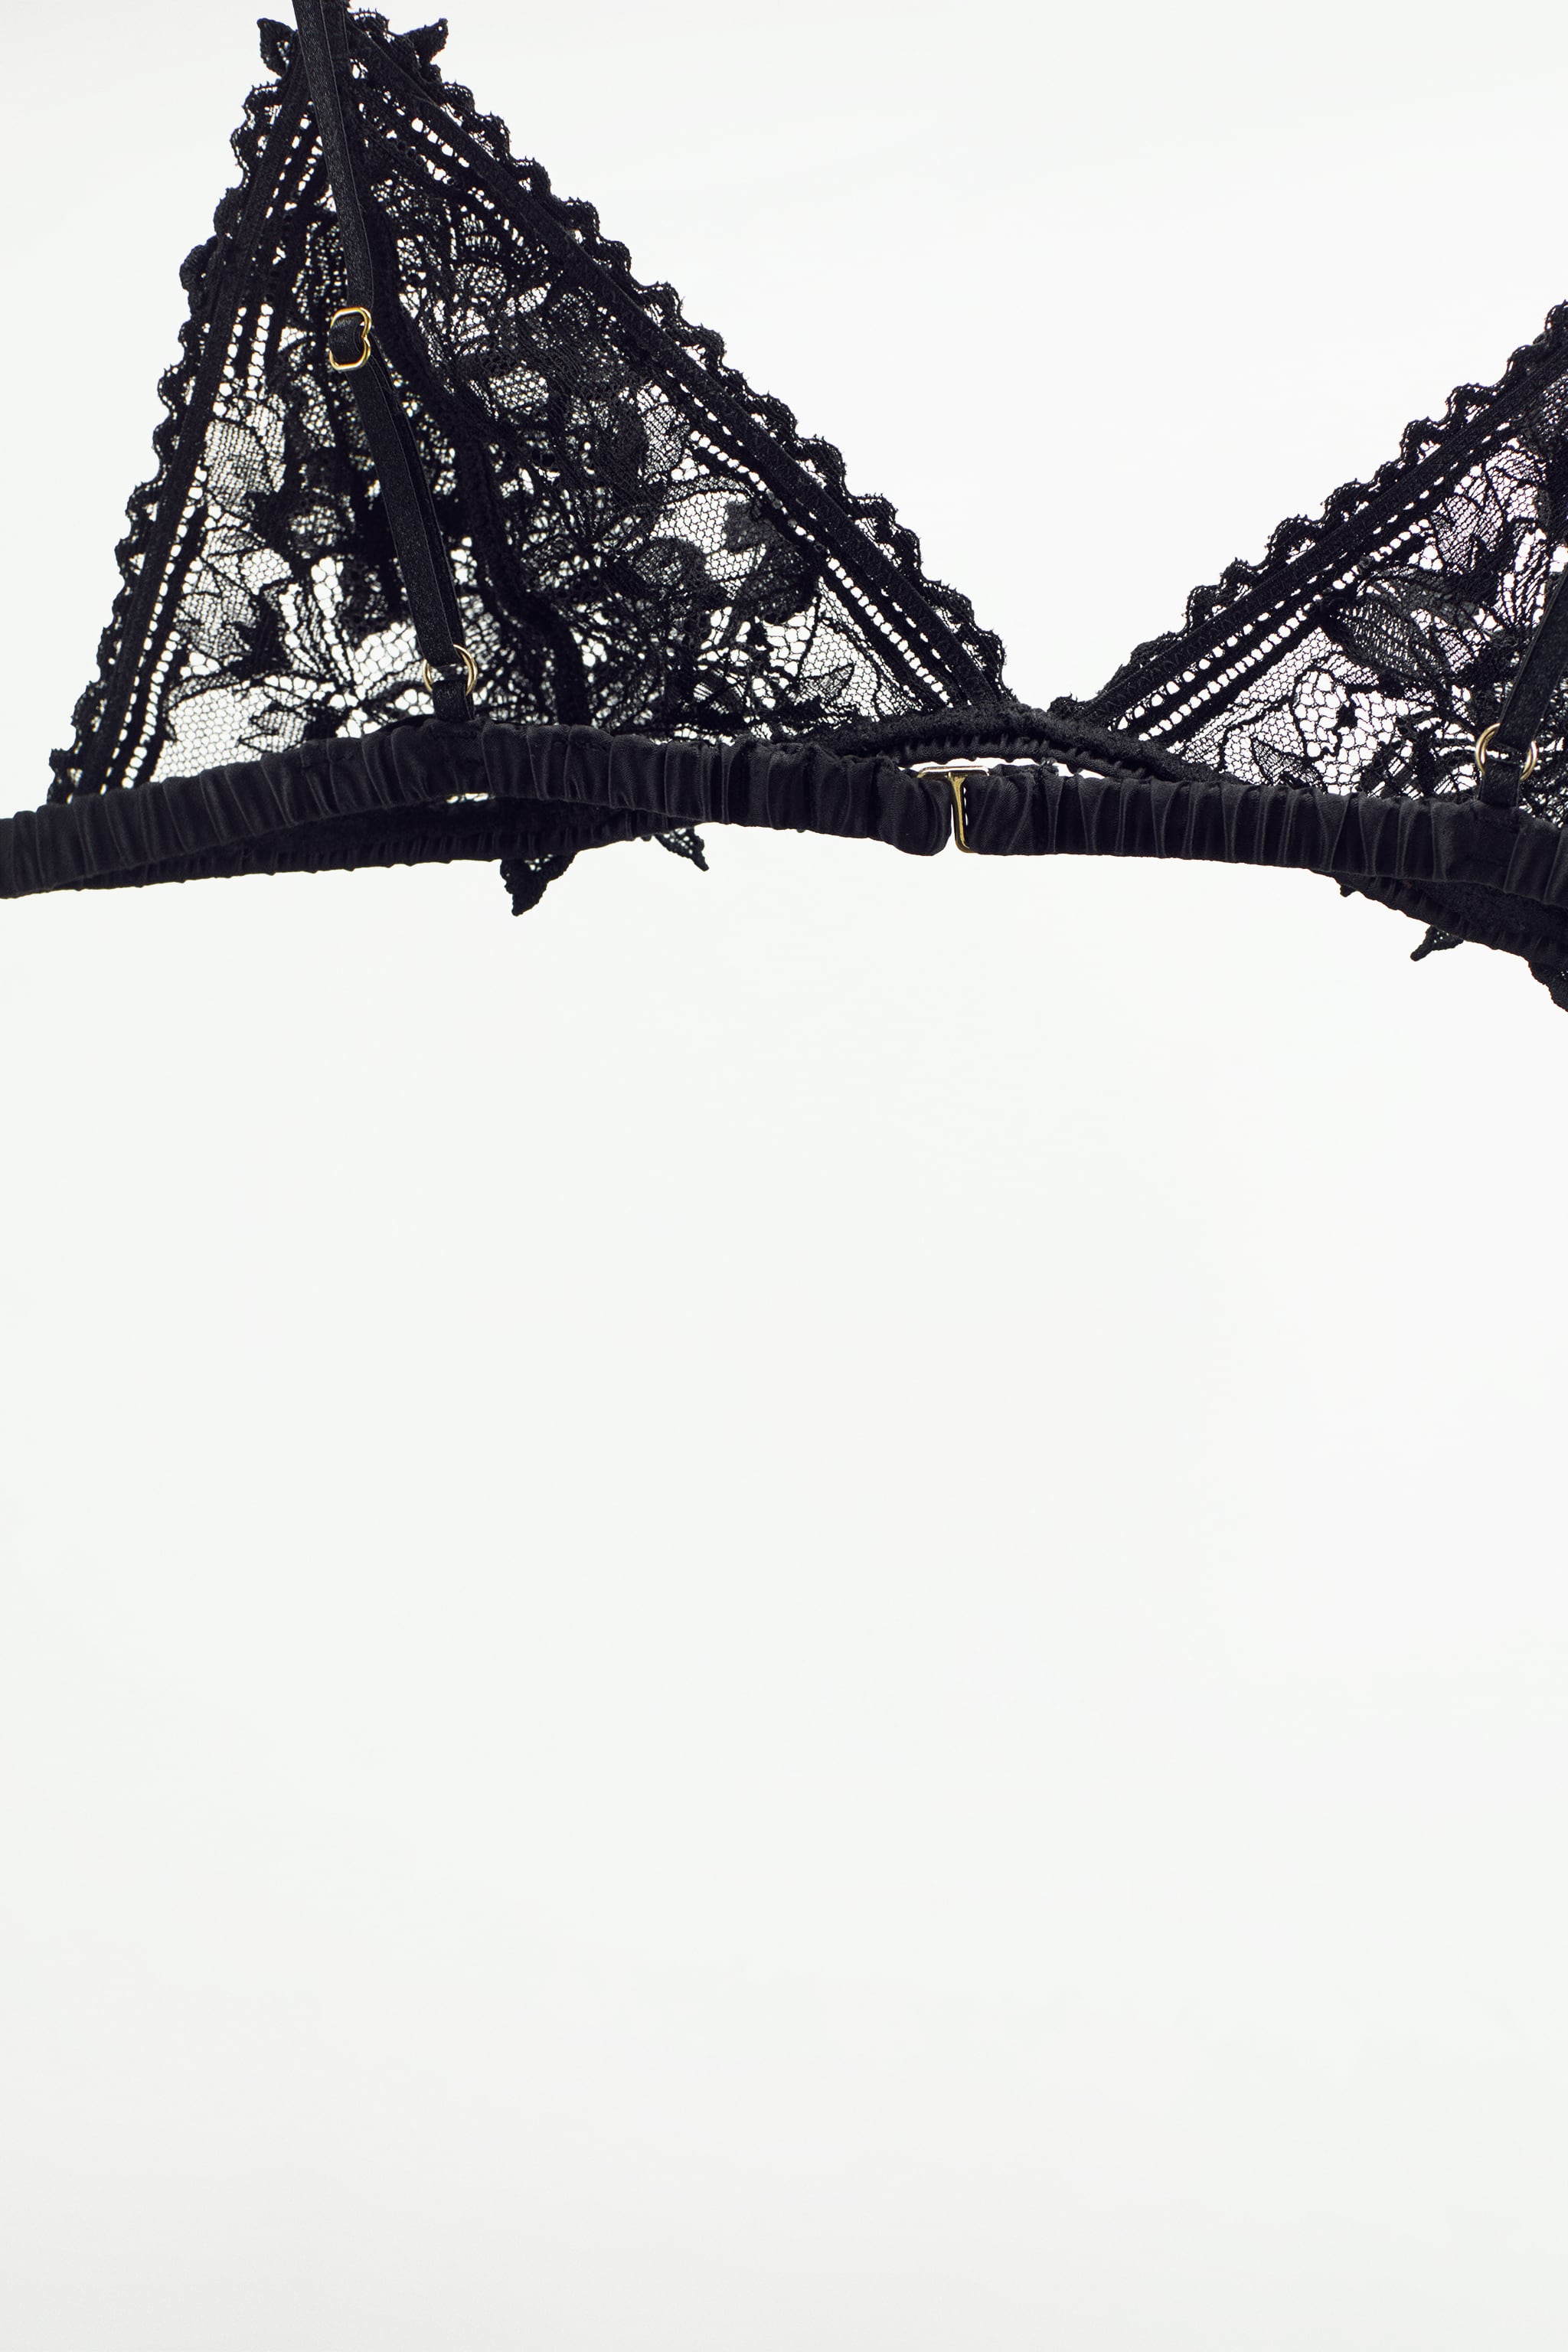 Triangle bralette with Lace fabric. trim. Adjustable thin straps. Back hook closure.